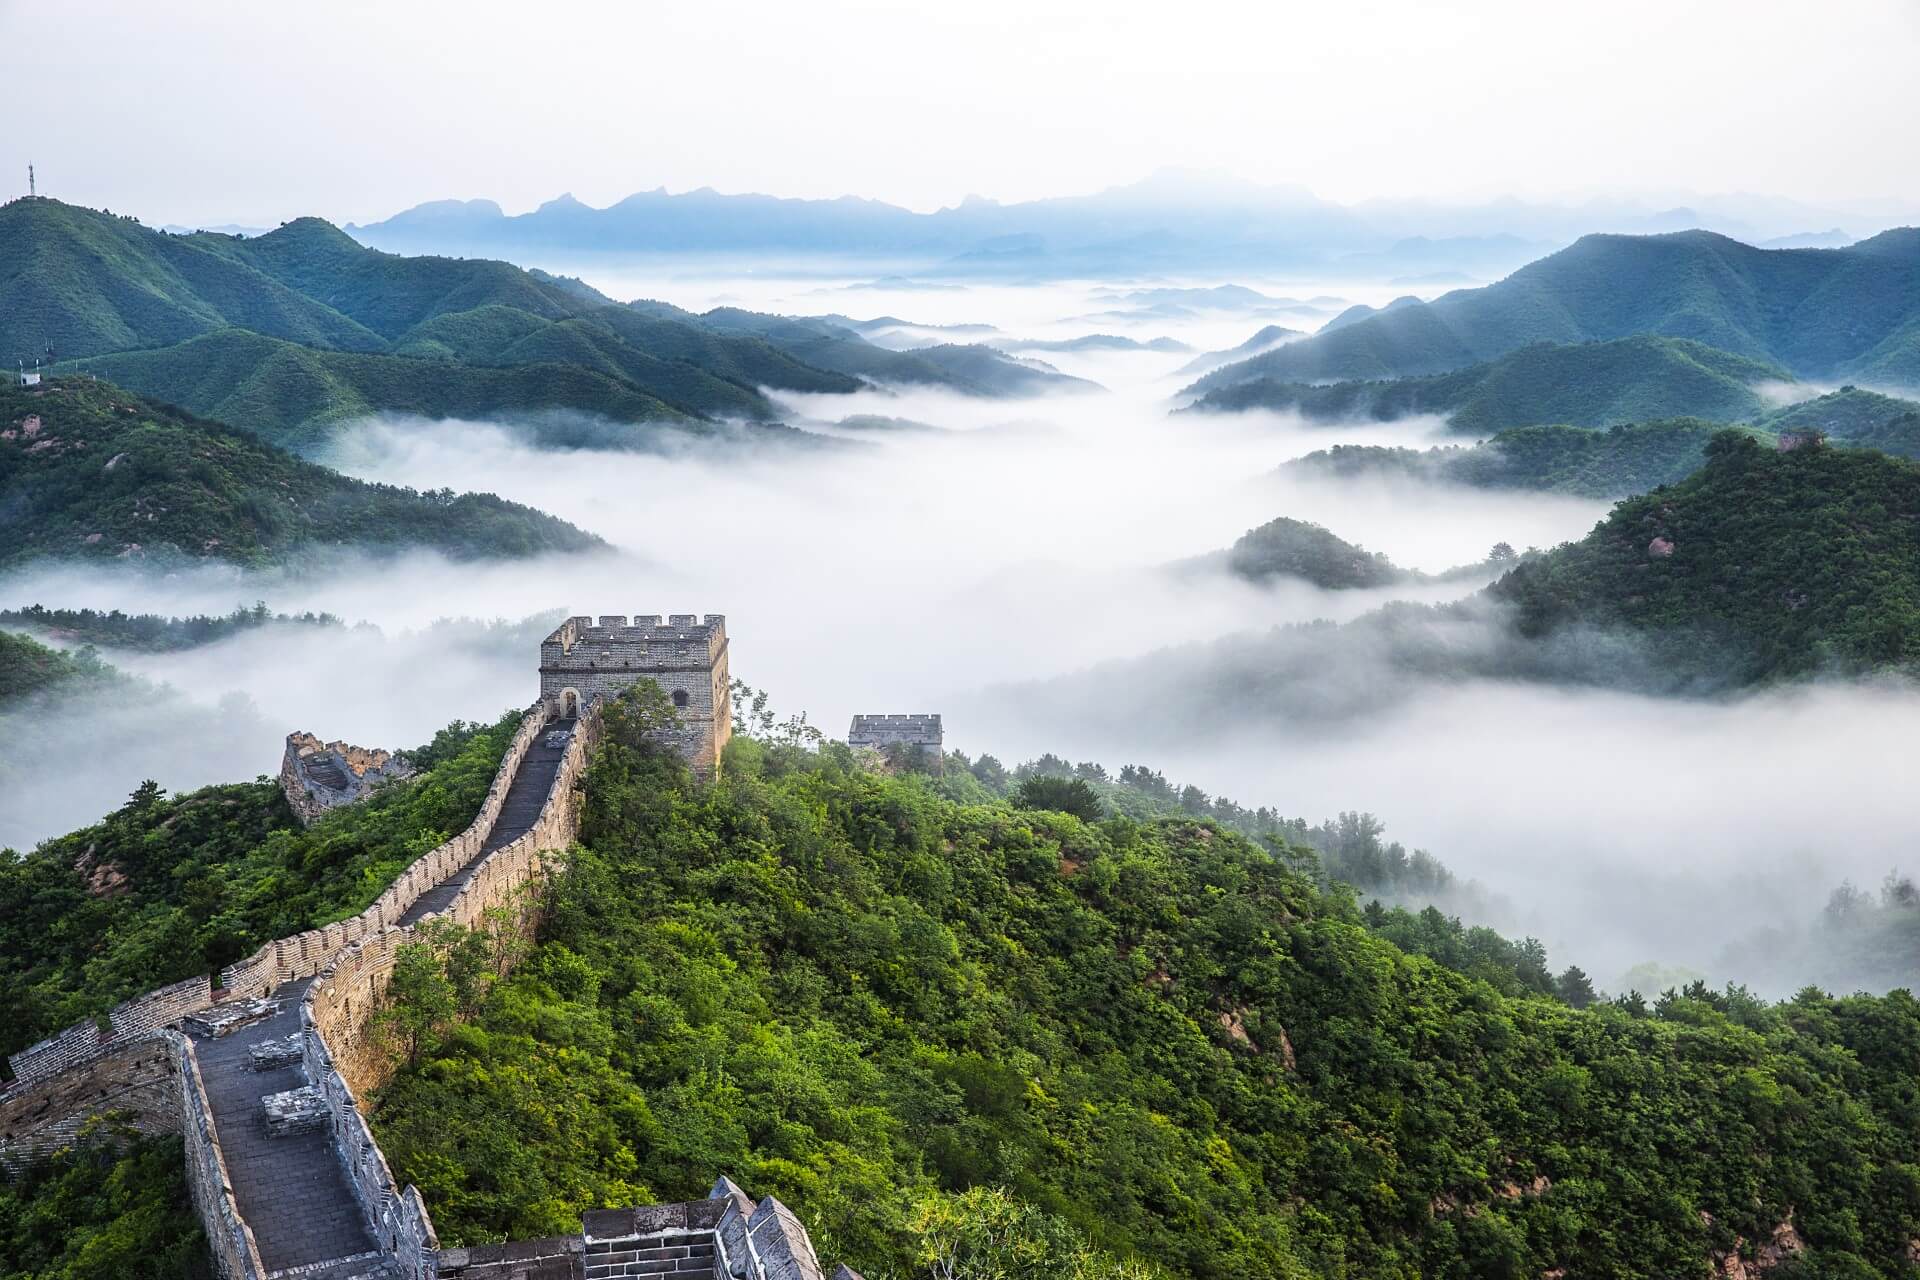 A portion of the Great Wall of China.